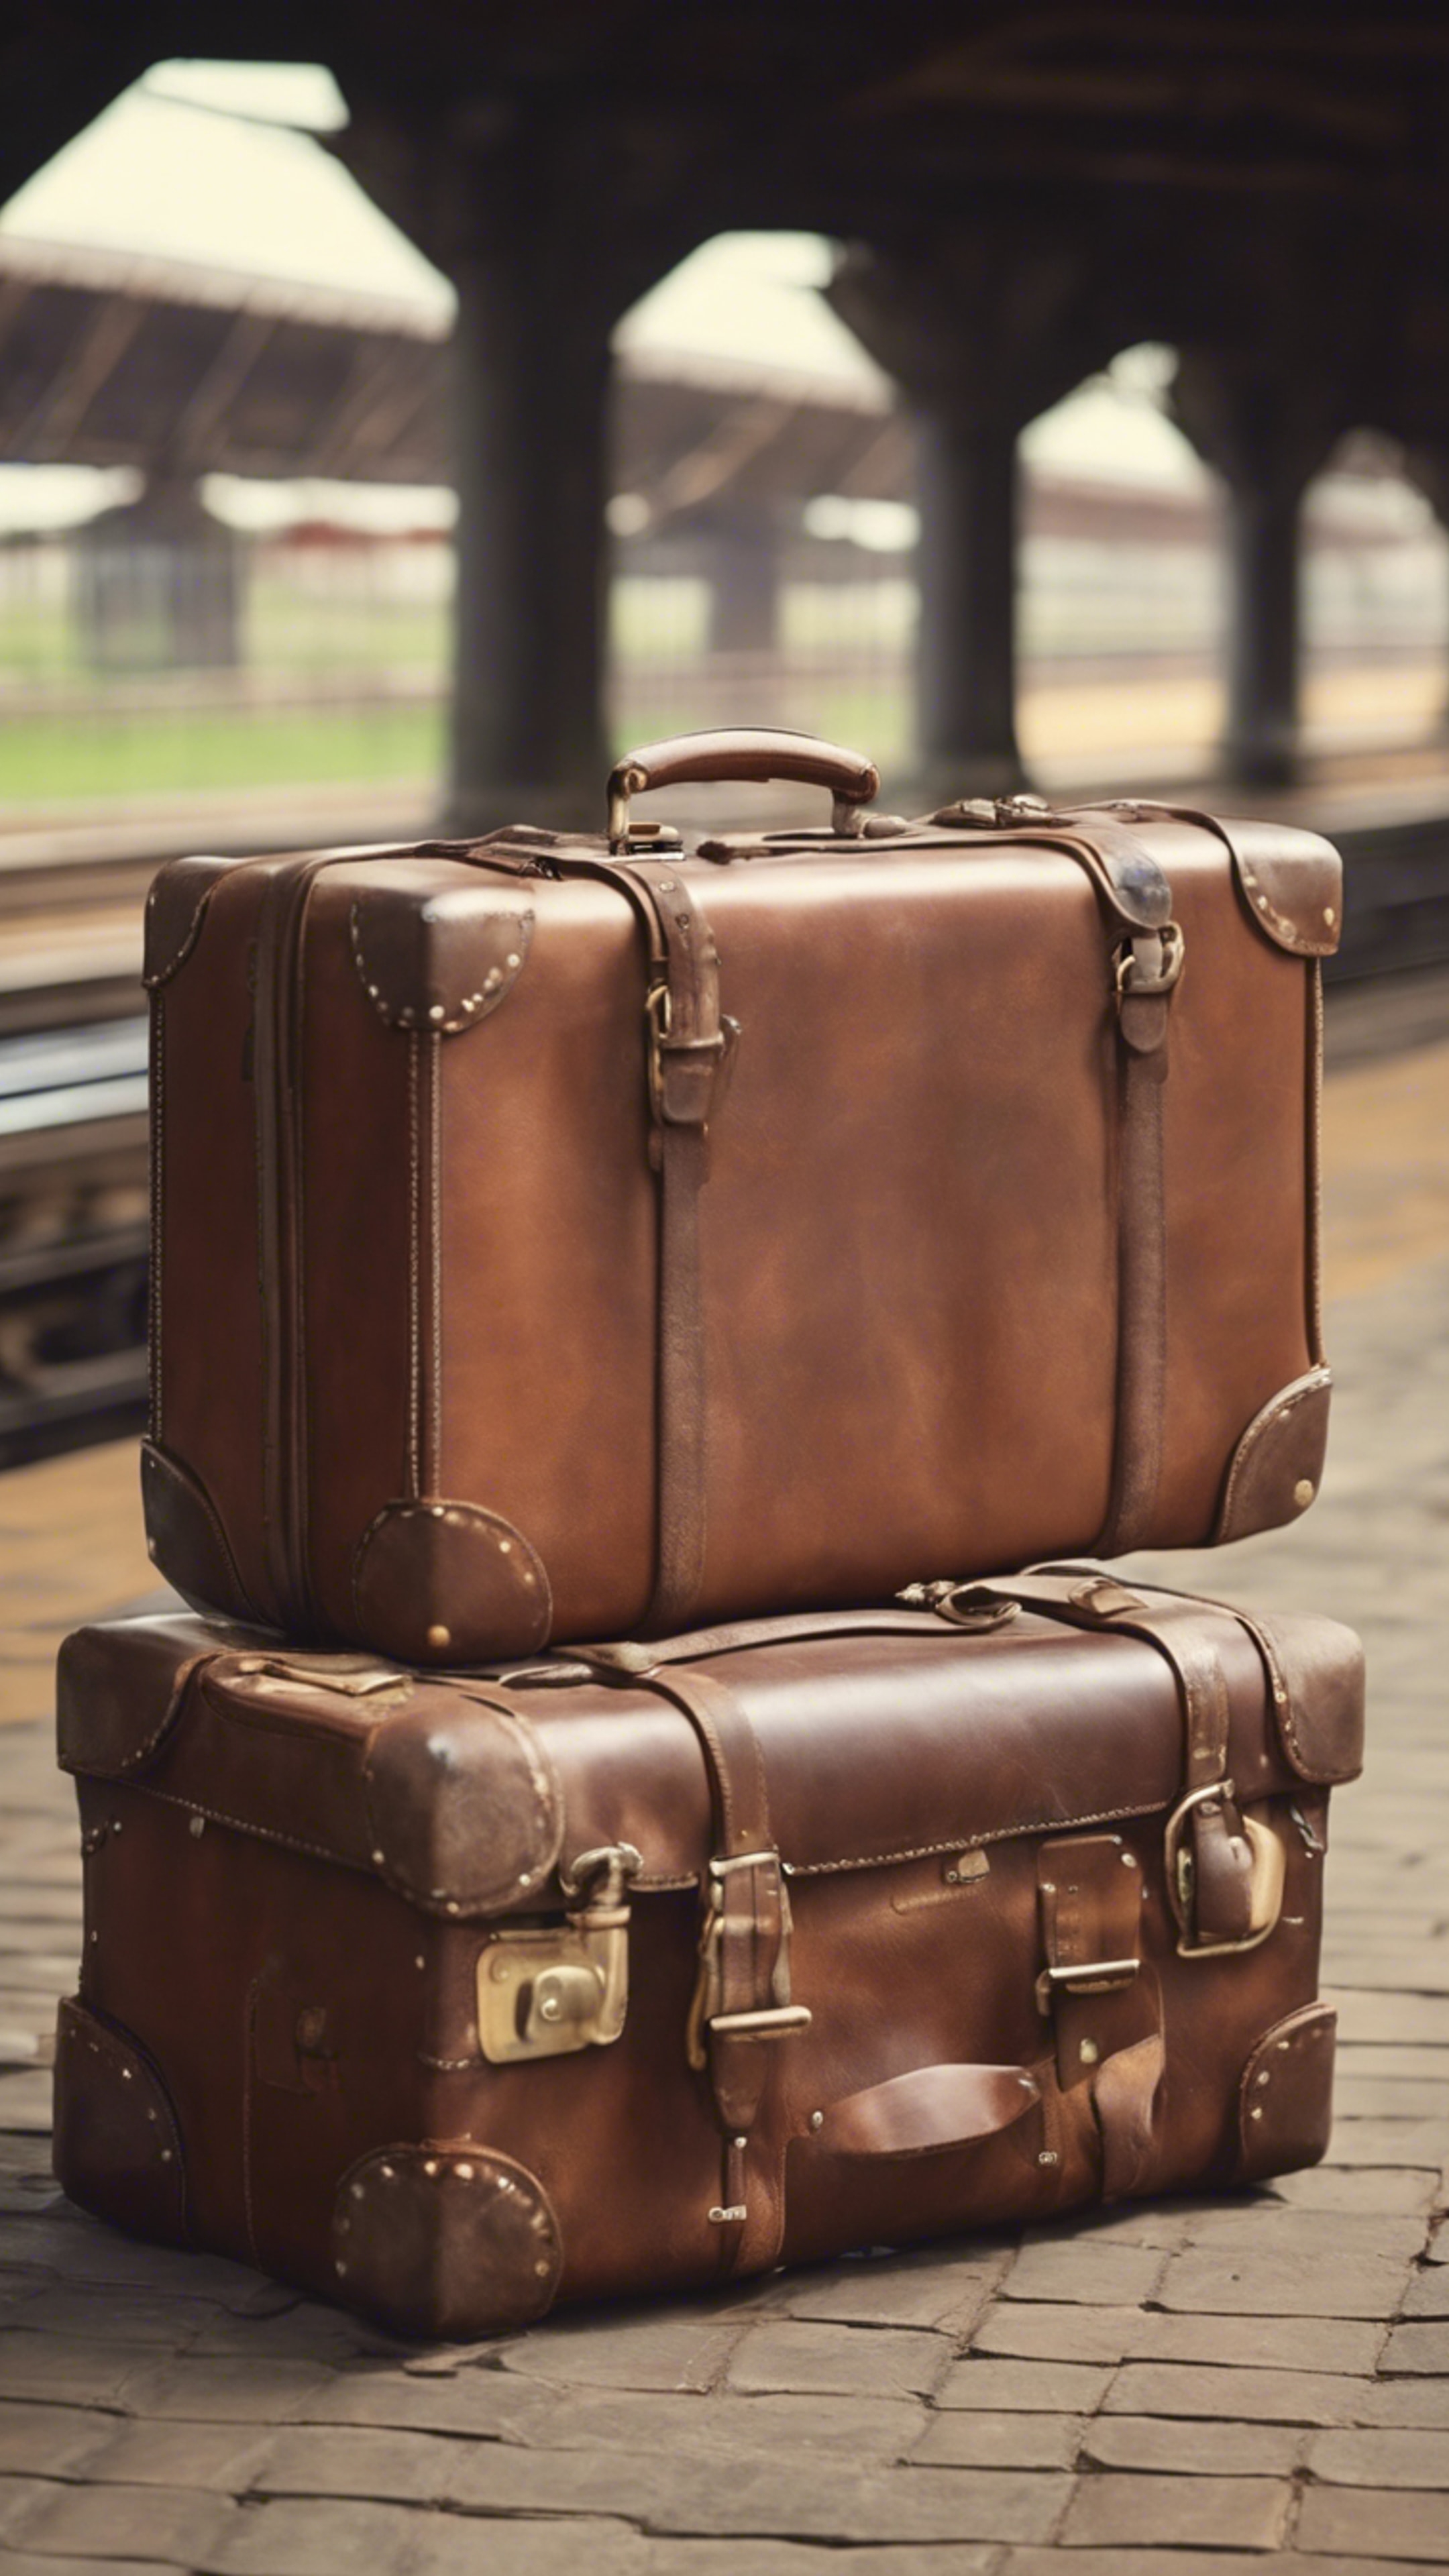 A rustic brown leather suitcase with travel tags, sitting at a quaint railway station. Tapeta[6b7e956de06740cdbd0e]